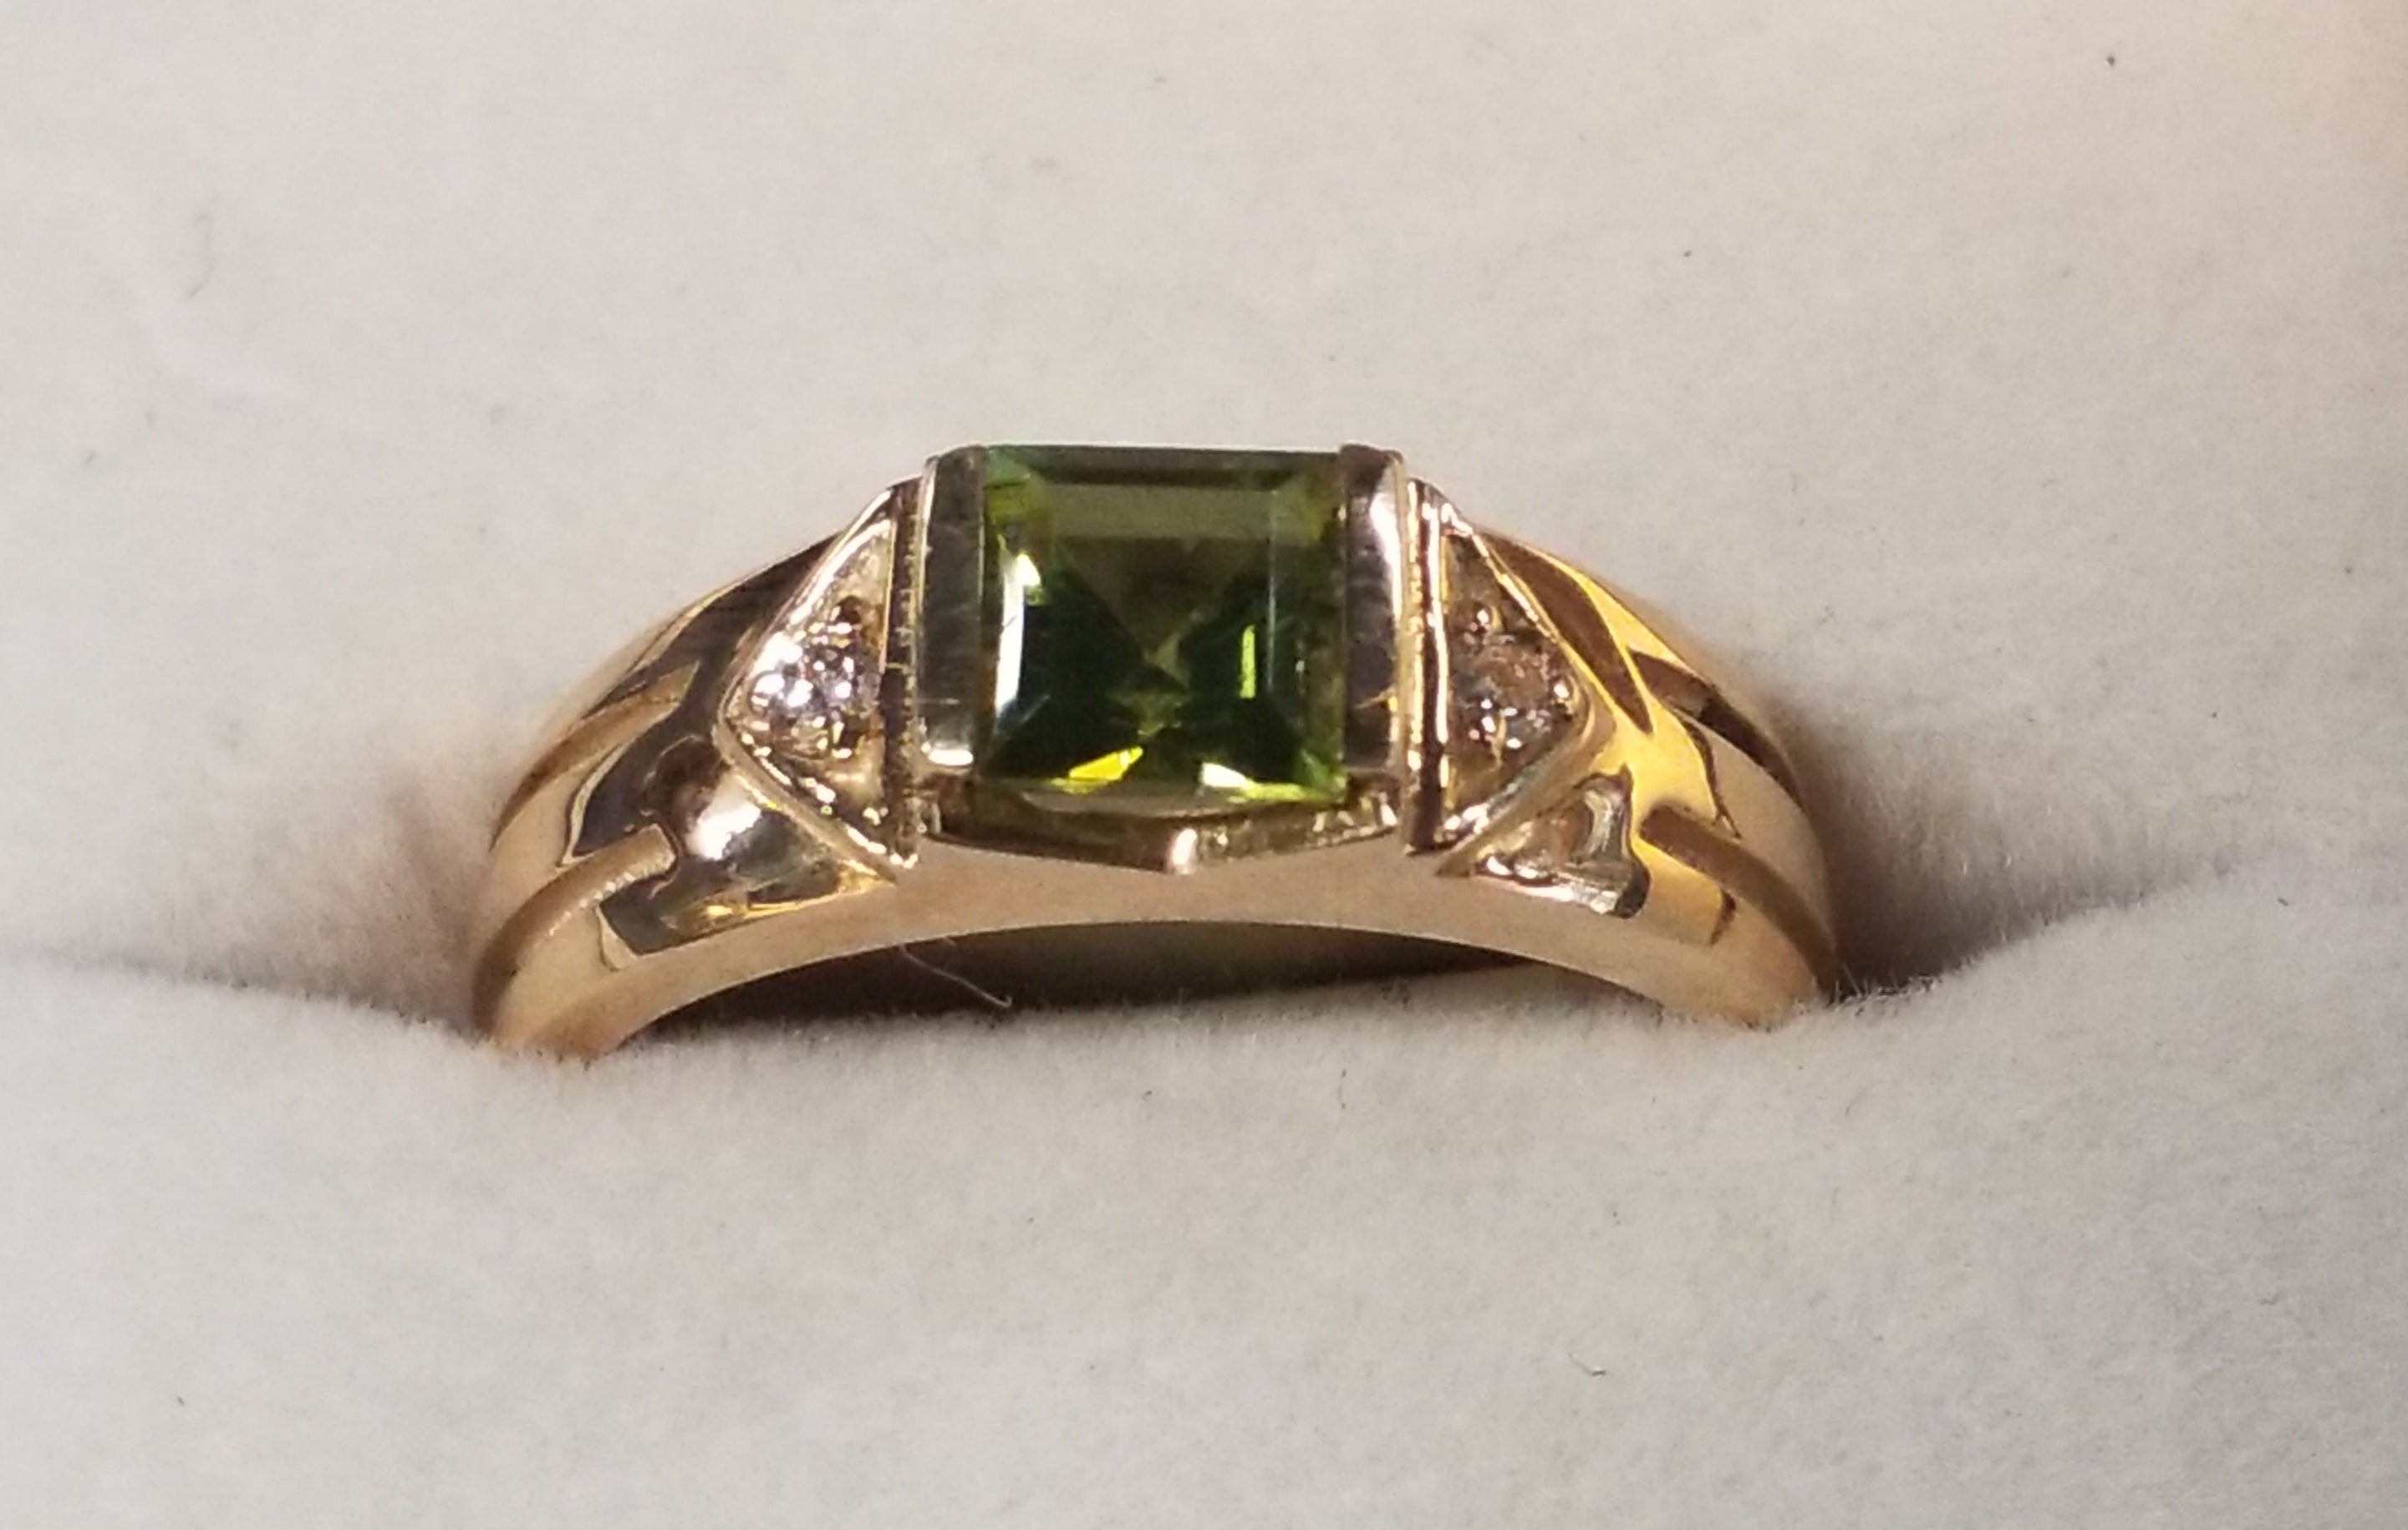 Square Cut Peridot Ring with Diamond Accents